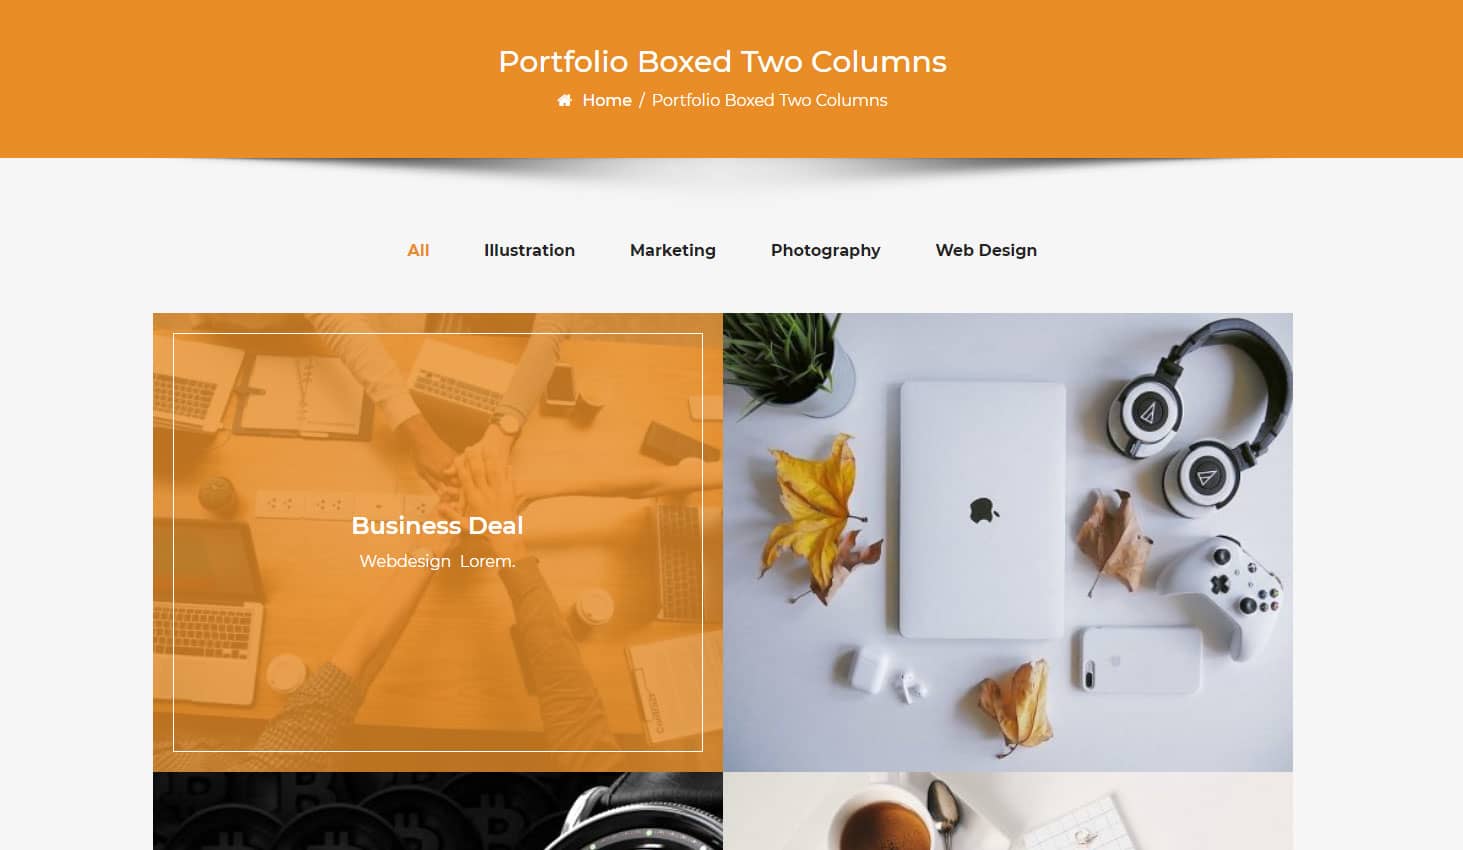 Crypto Premium WordPress Theme For Cryptocurrency Business and Blog Websites - A WP Life - Portfolio Boxed Two Column Layout Template